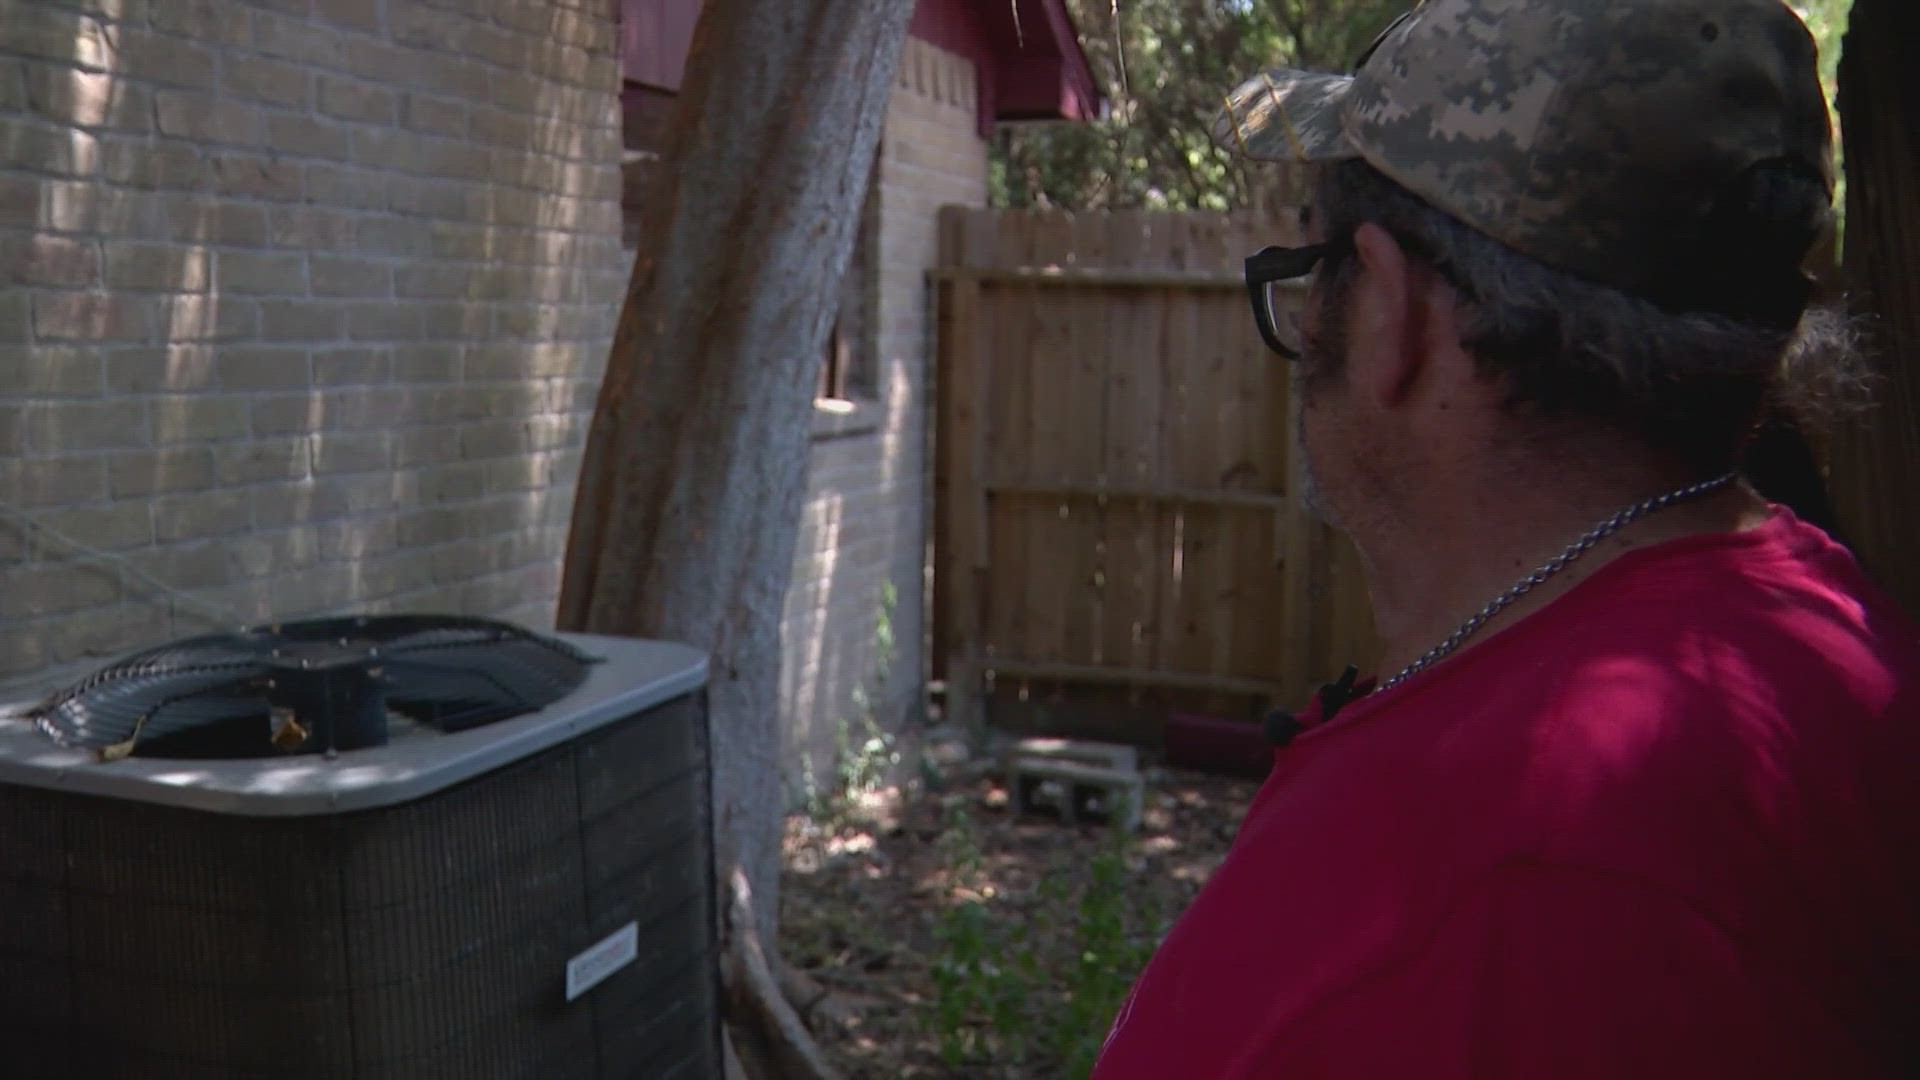 The veteran is living on a fixed income and says he can't afford to replace the air conditioner.